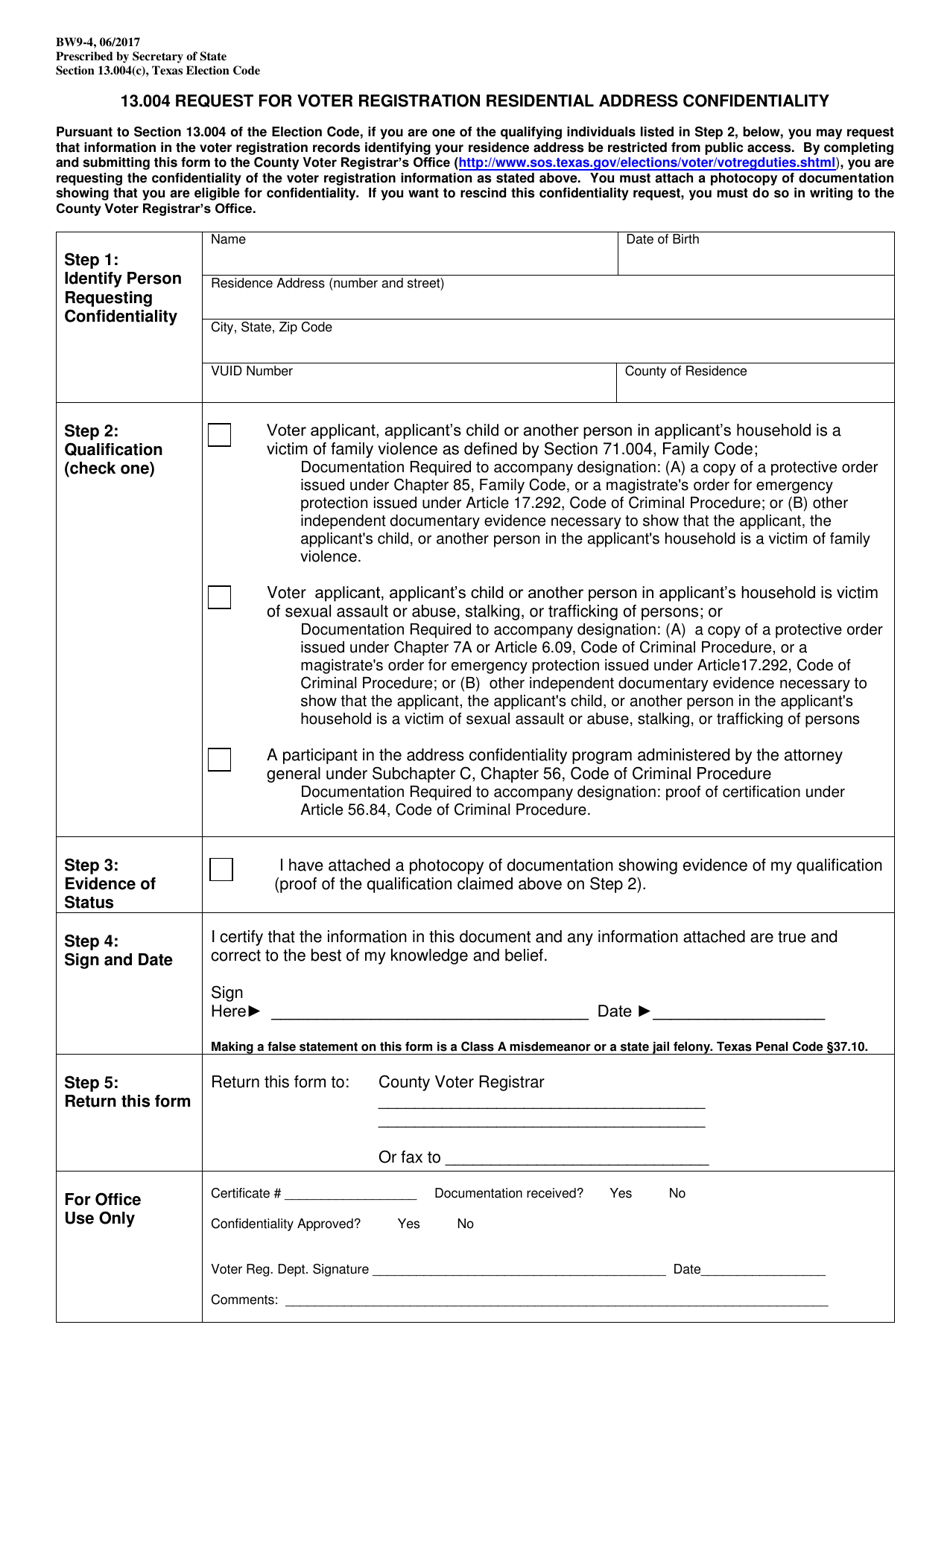 Form BW9-4 13.004 Request for Voter Registration Residential Address Confidentiality - Texas (English / Spanish), Page 1